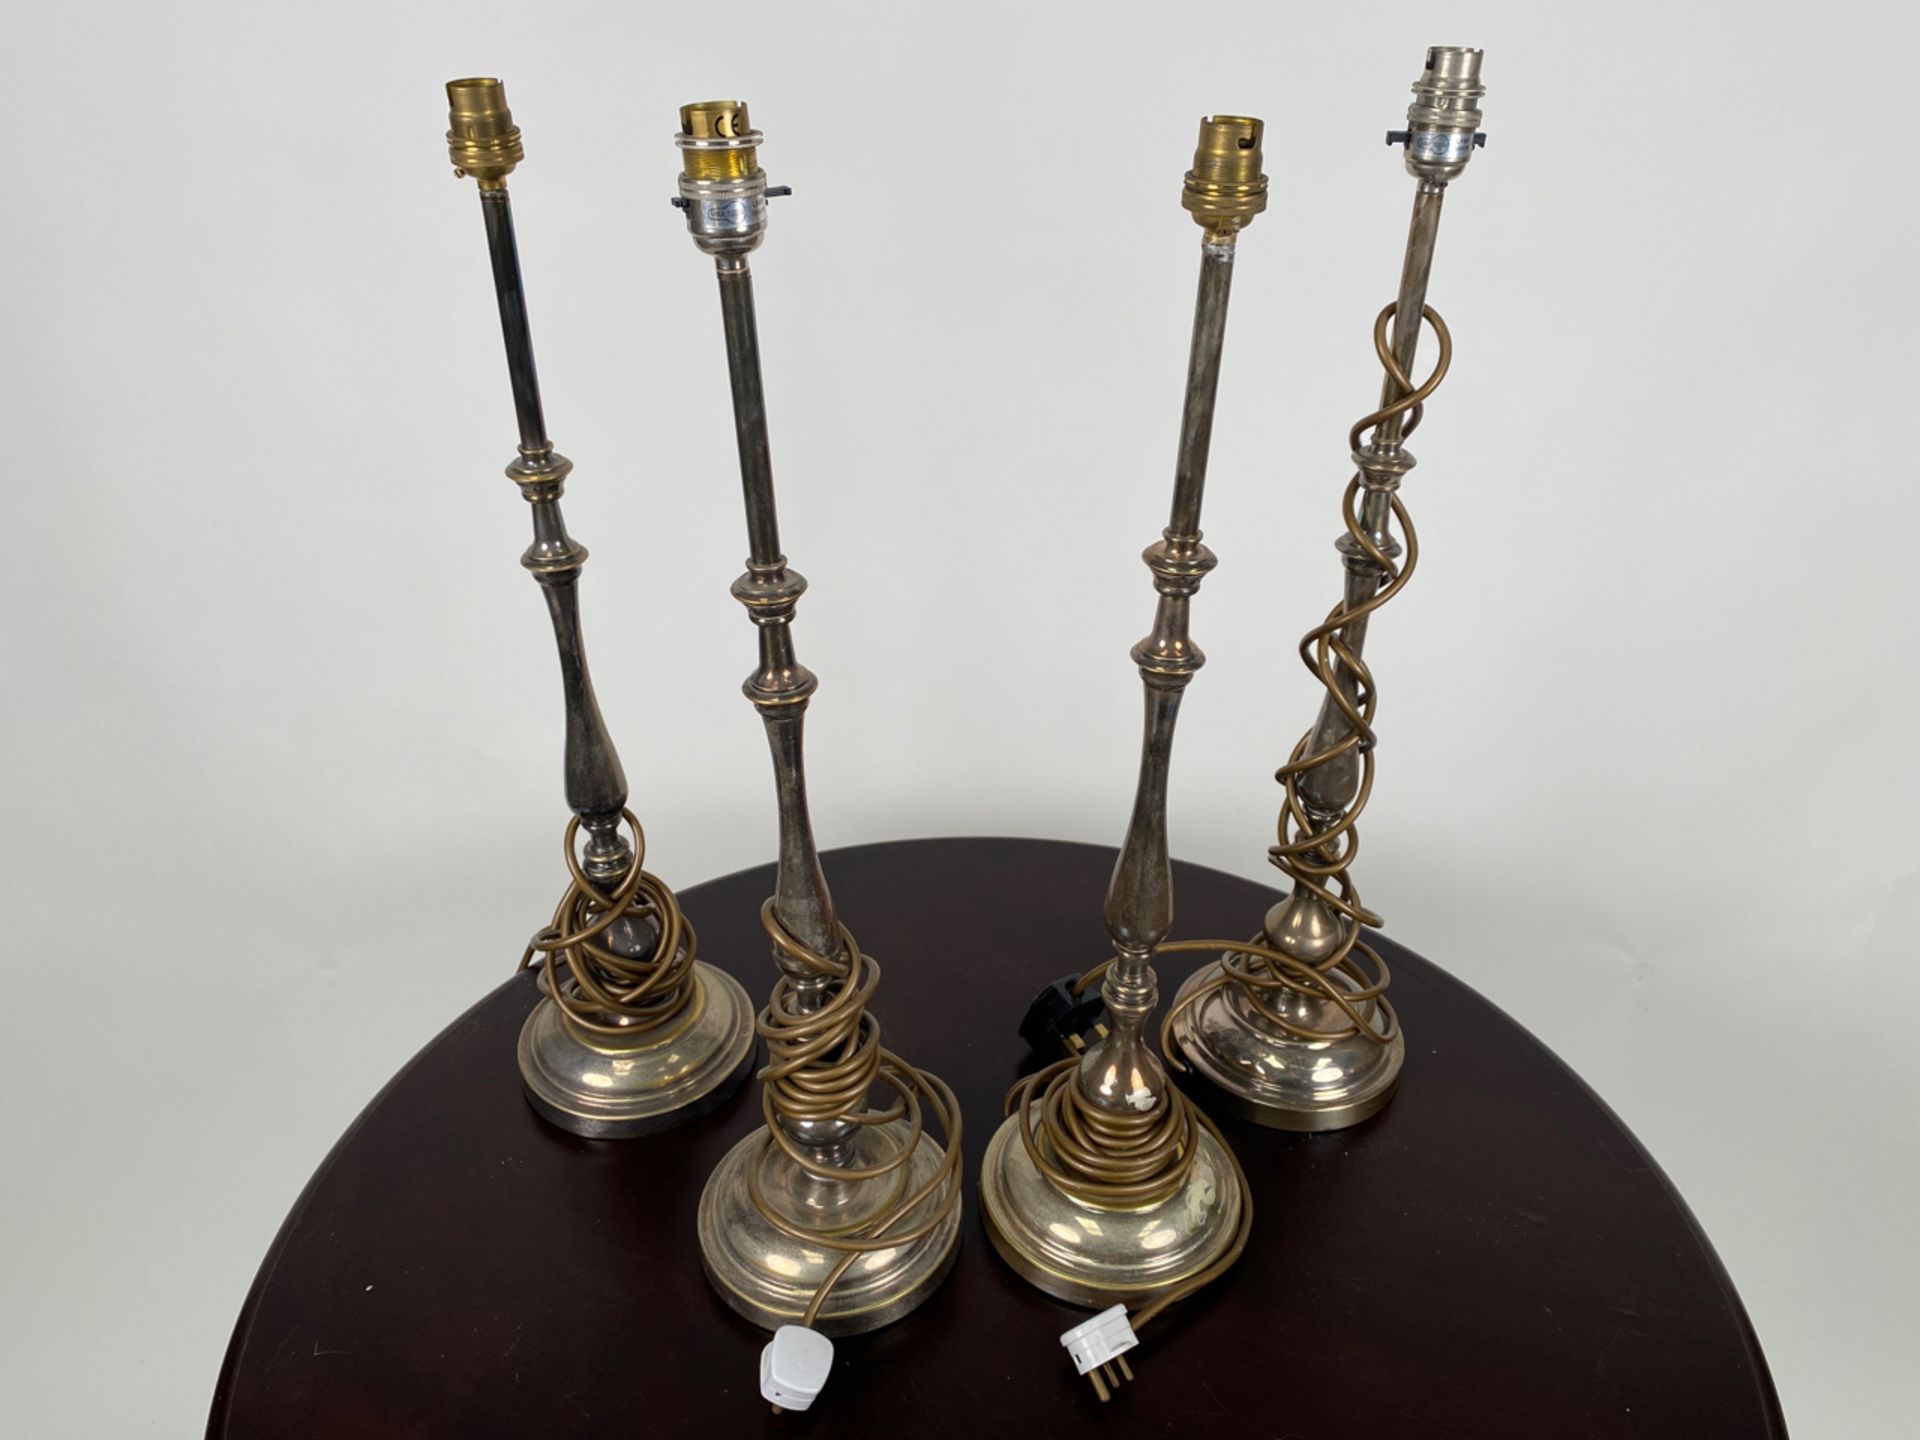 Set of 4 Nickel Plated Table Lamps - Image 2 of 4